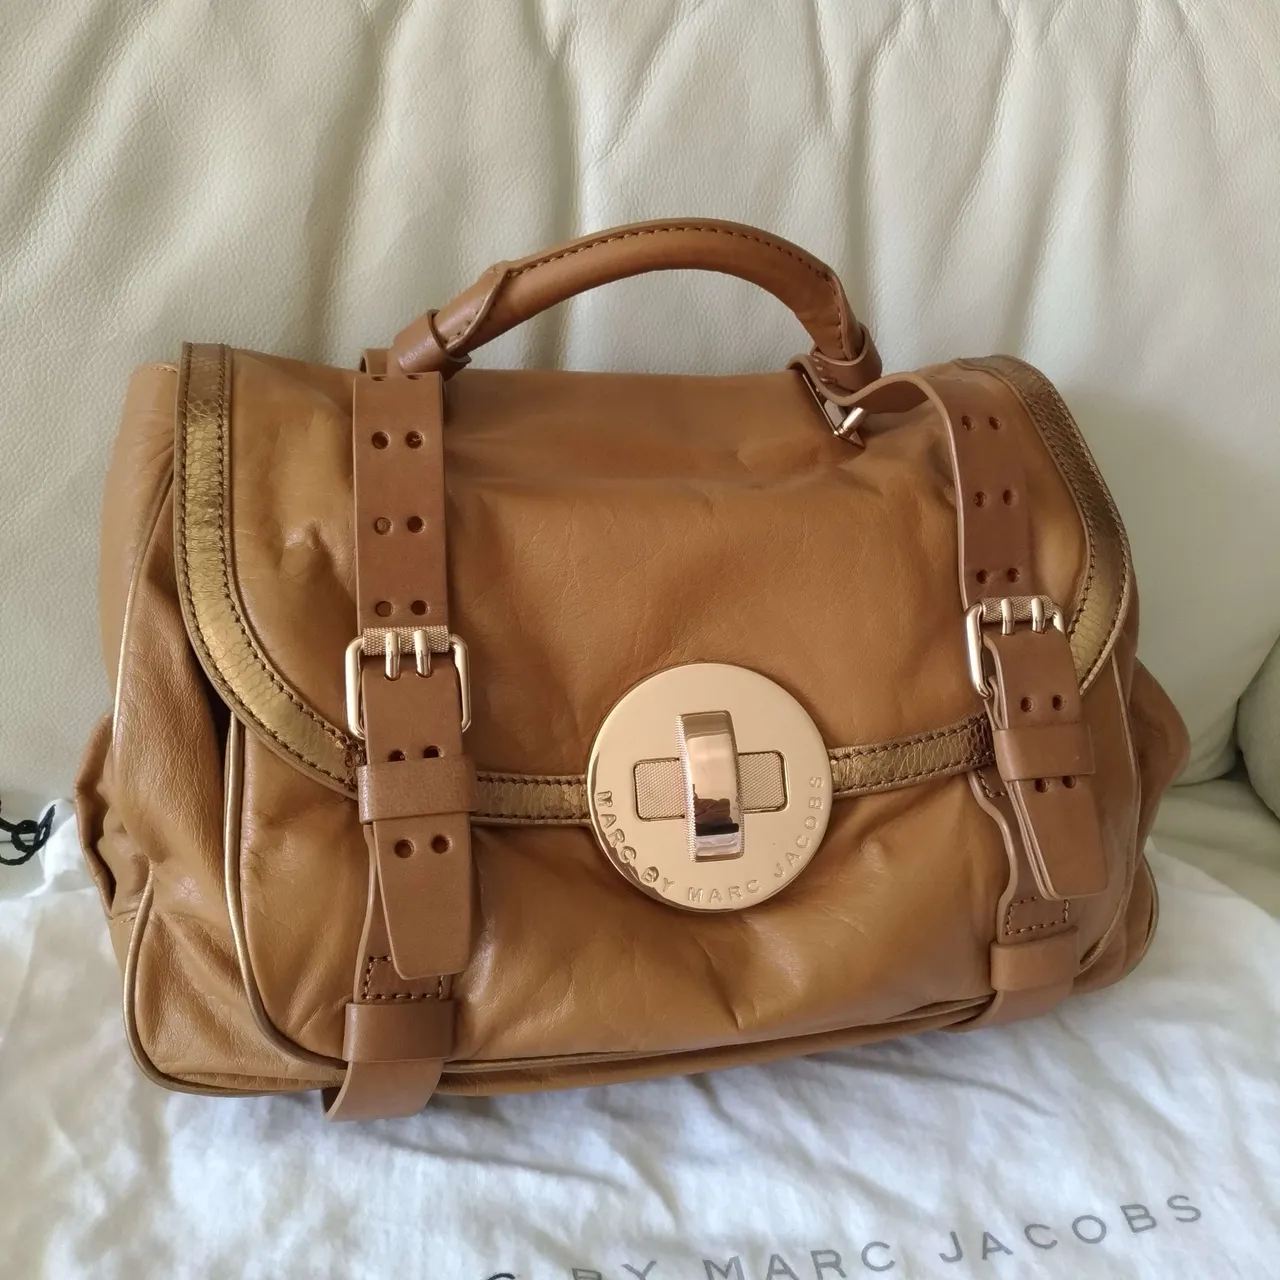 MARC By MARC JACOBS Leather Satchel photo 1